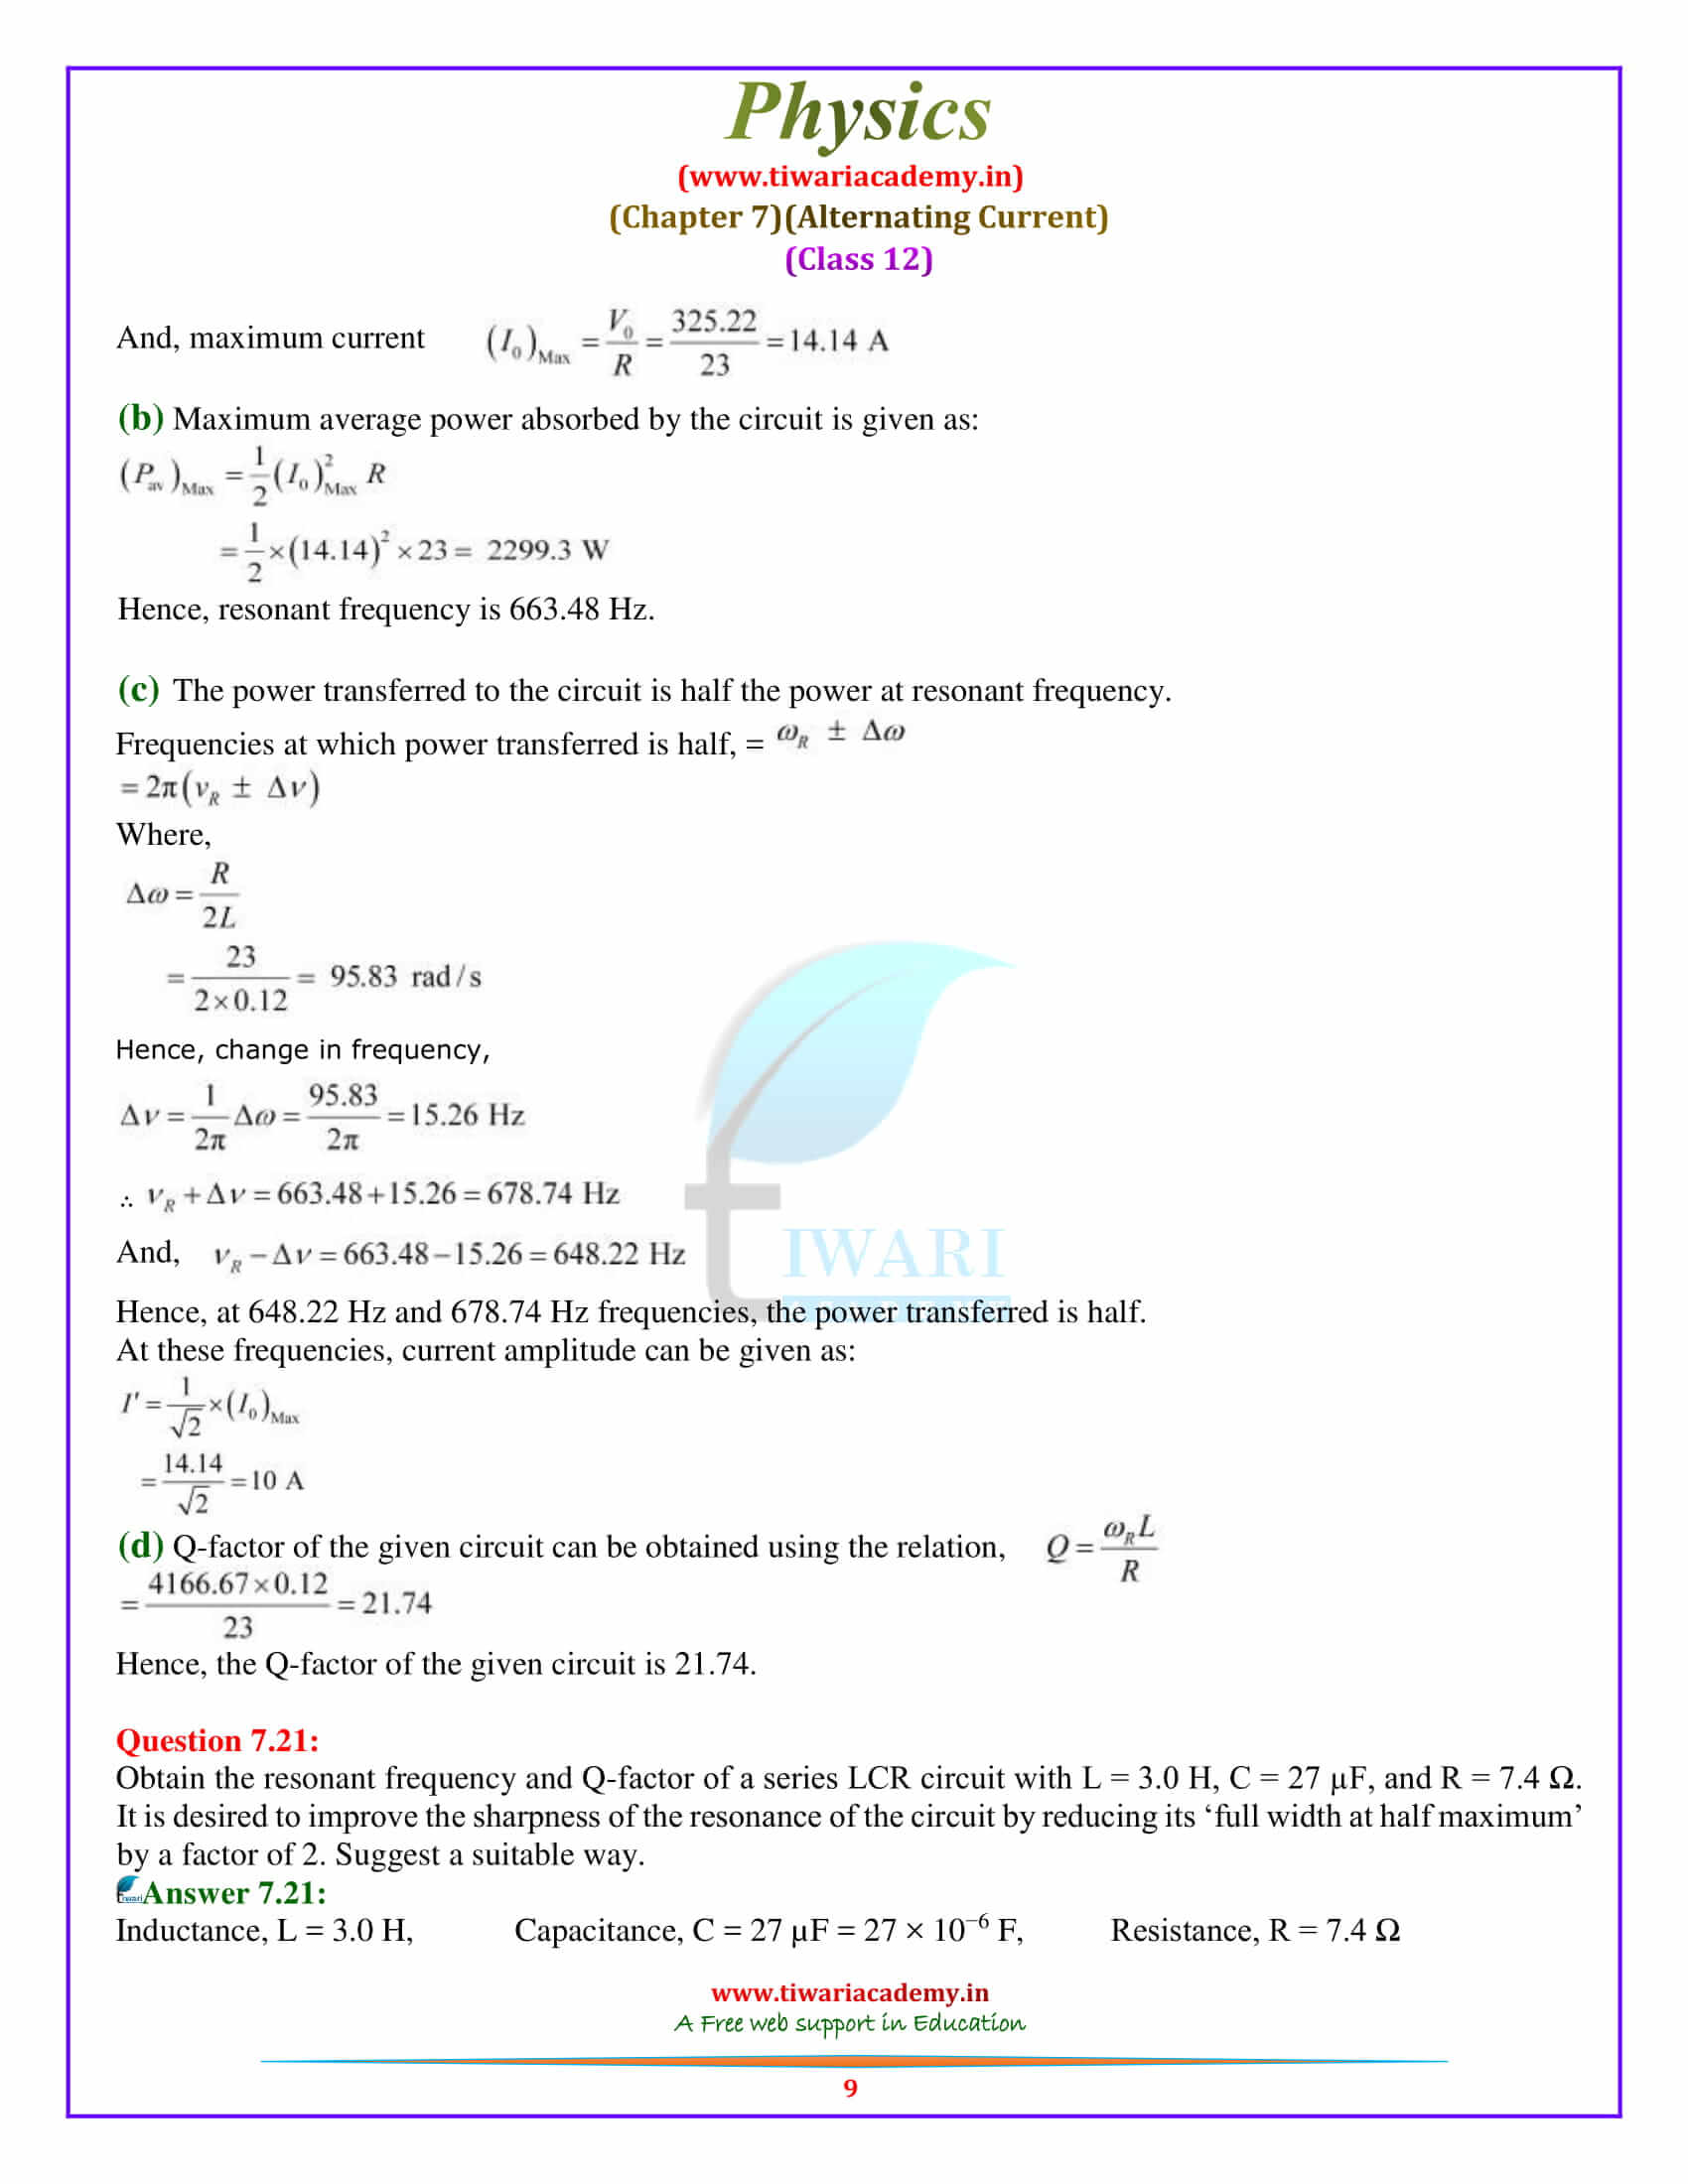 12 Physics Chapter 7 Alternating Current solutions pdf